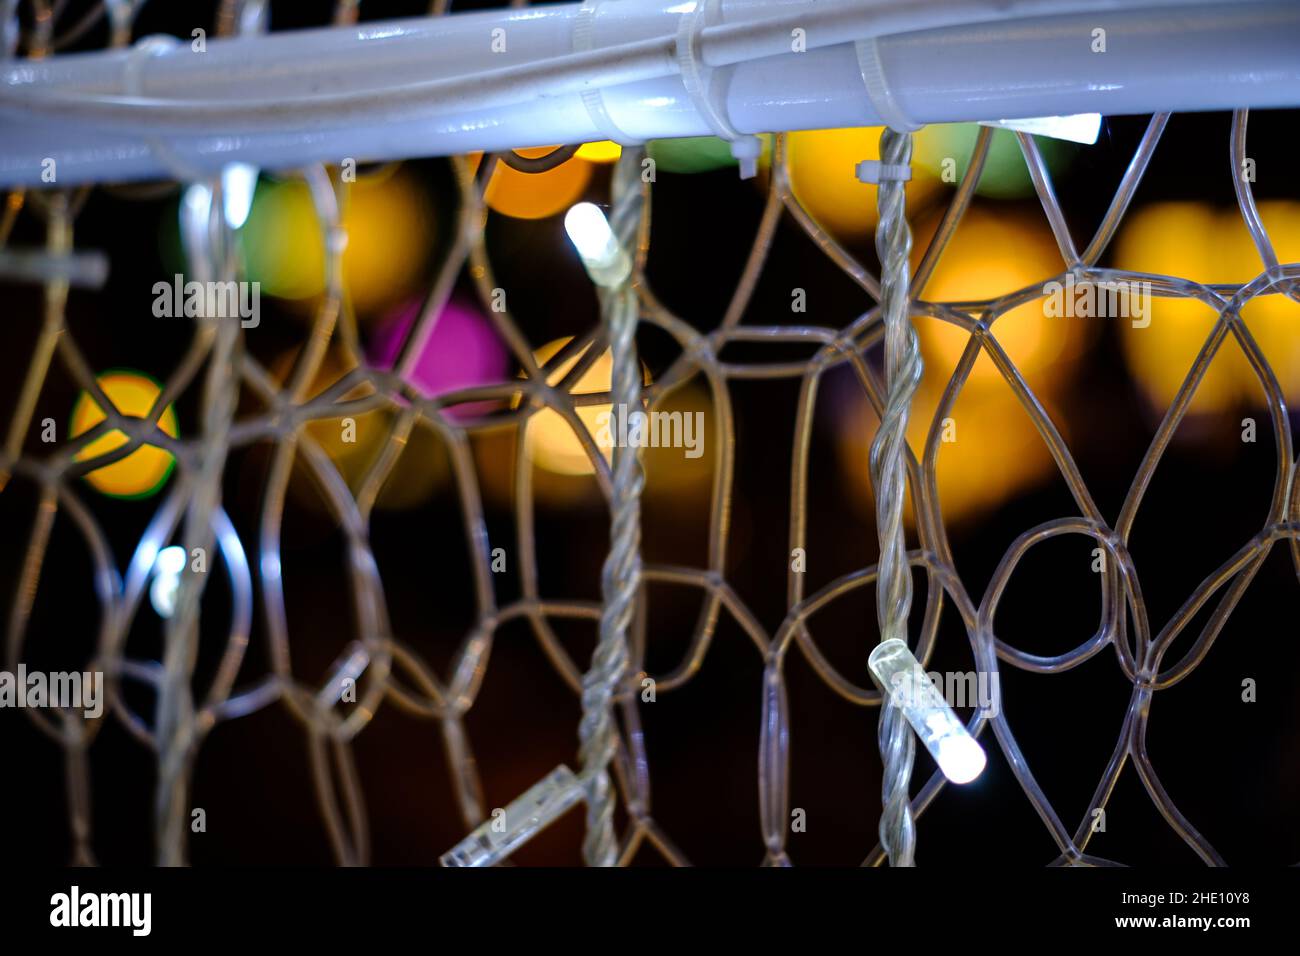 Some white decoration light bulbs web close up still with some colourful blurred spots on a black background Stock Photo